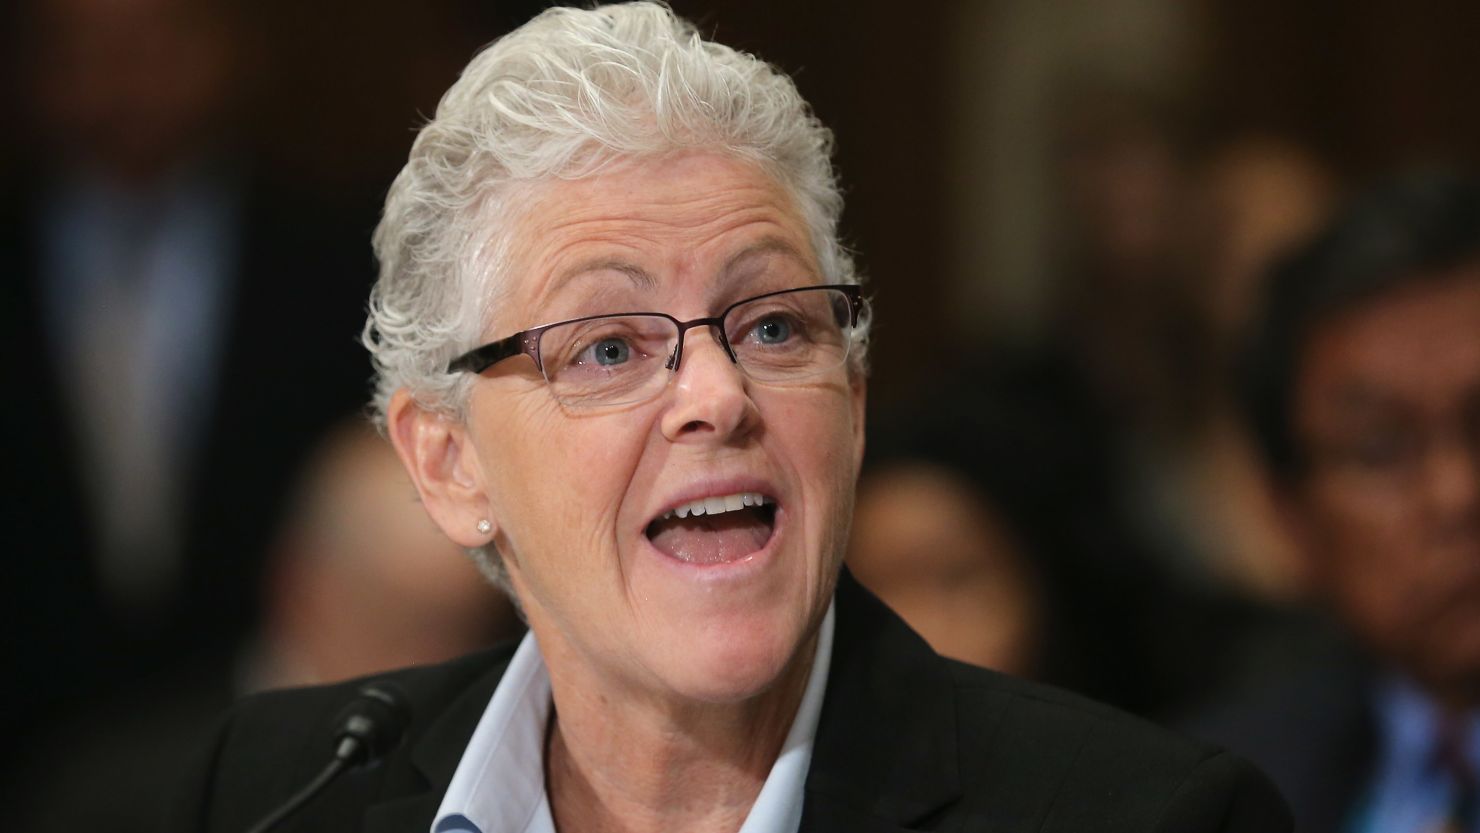 In this September 16, 2015, file photo, then-Environmental Protection Agency Administrator Gina McCarthy testifies before the Senate Environmental and Public Works Committee in the Dirksen Senate Office Building on Capitol Hill in Washington.